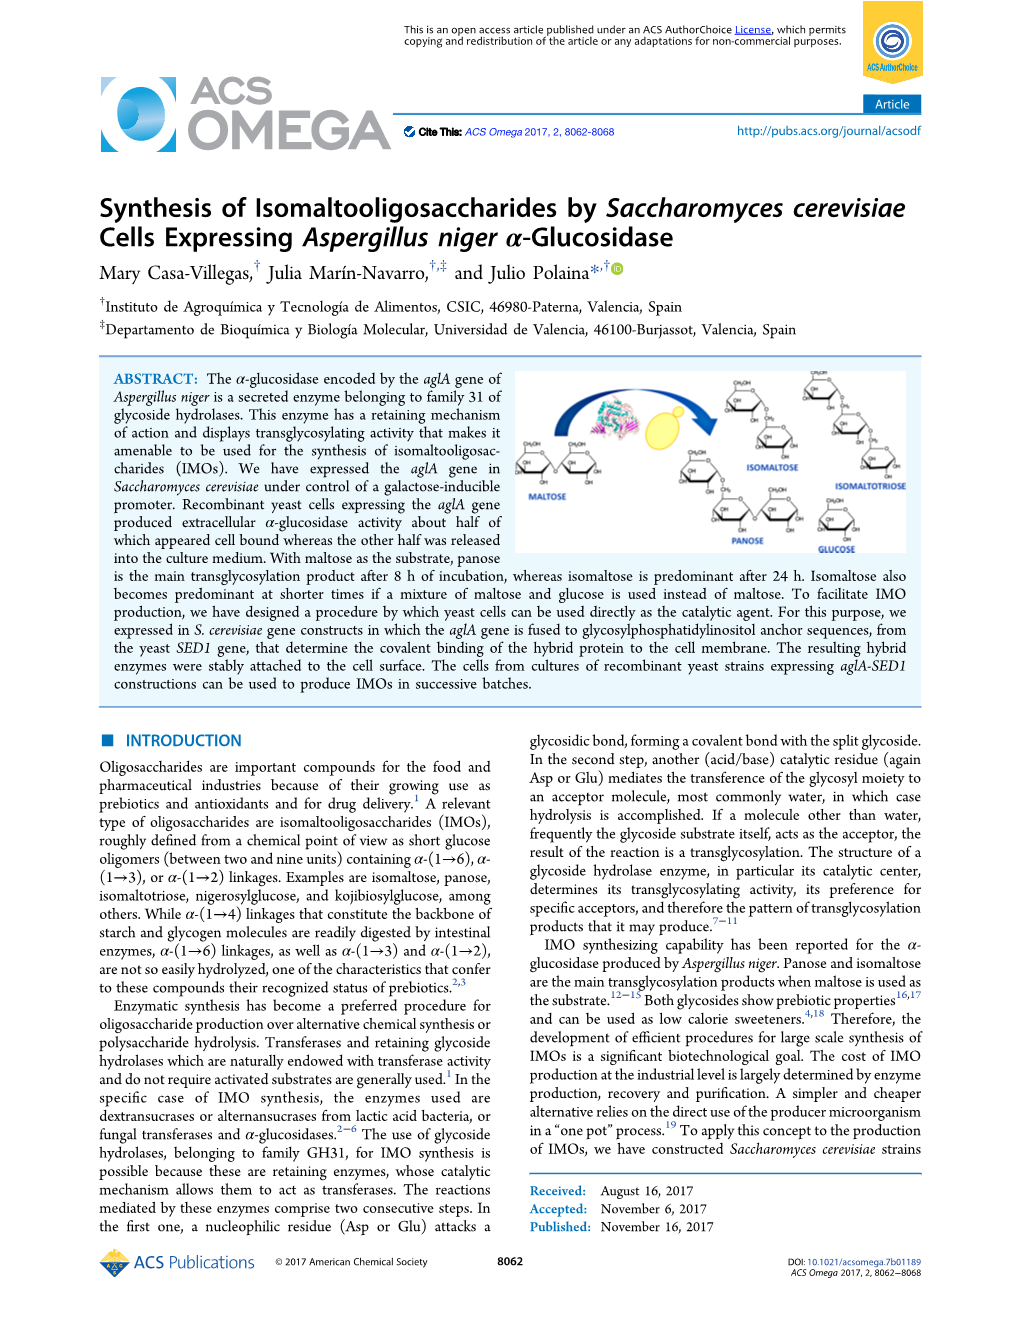 Synthesis of Isomaltooligosaccharides by Saccharomyces Cerevisiae